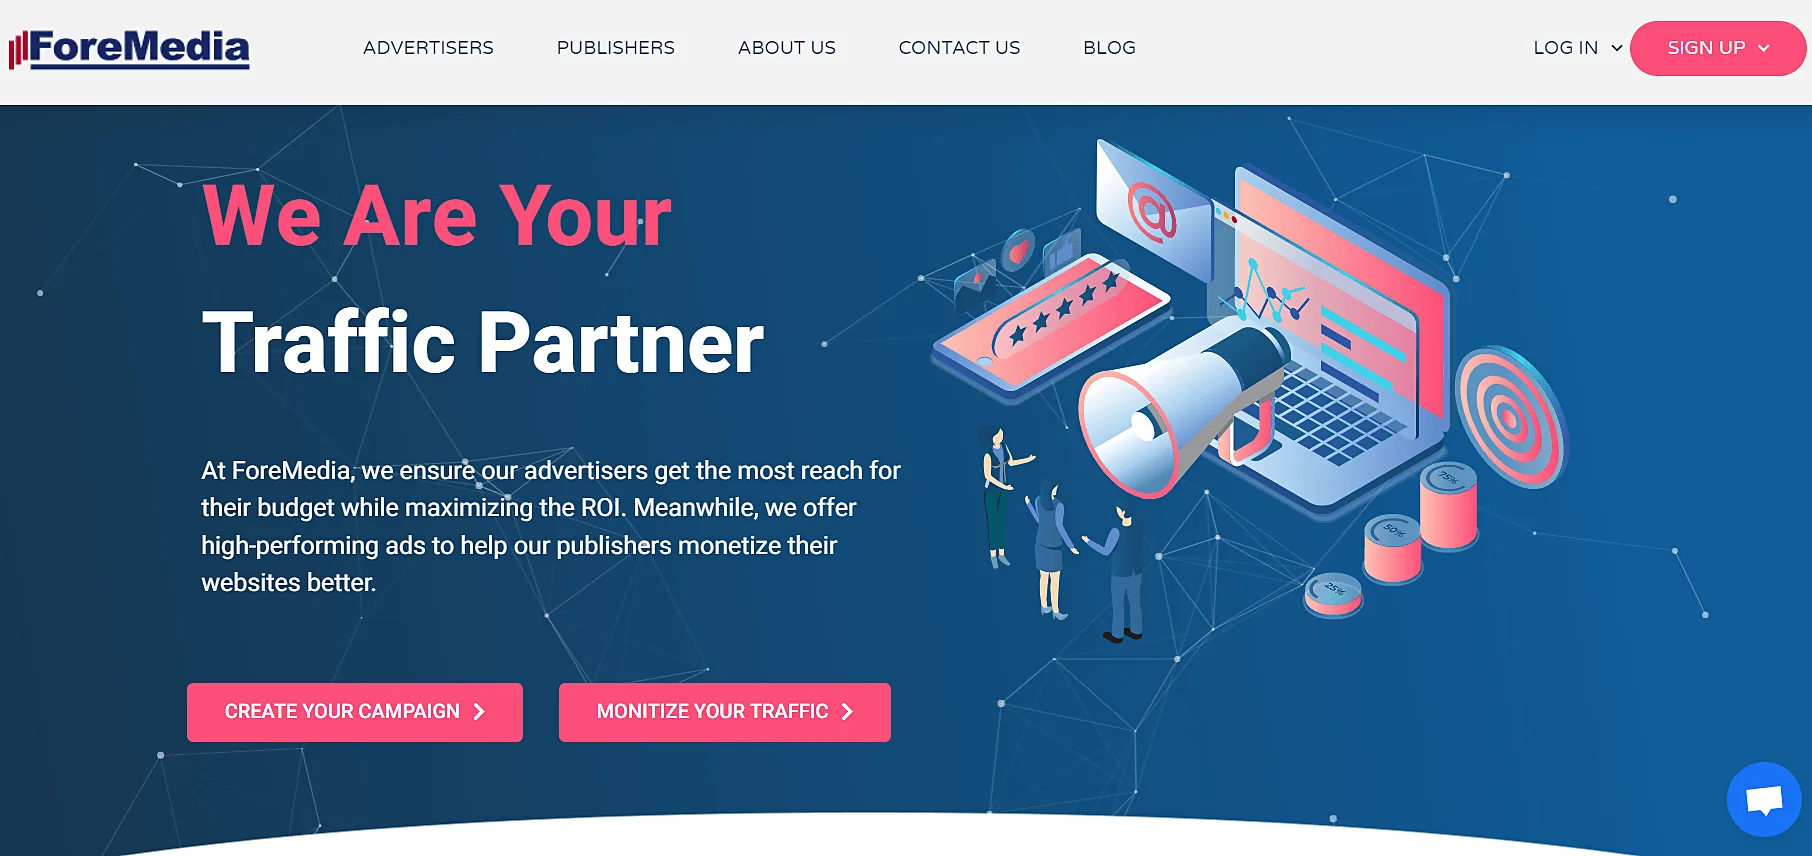 A vibrant website header for ForeMedia displaying a three-dimensional illustration on a dark blue background. The text 'We Are Your Traffic Partner' in large white letters dominates the upper left side. Below it is a short description of the services provided by ForeMedia for advertisers and publishers. On the right, there's a dynamic image of a laptop with various advertising and analytics icons, such as a magnifying glass on an email, a bullseye, and a megaphone. The laptop is surrounded by small human figures, suggesting teamwork and engagement. Two call-to-action buttons read 'Create Your Campaign' and 'Monetize Your Traffic' in the lower section. The ForeMedia logo is displayed at the top left corner.